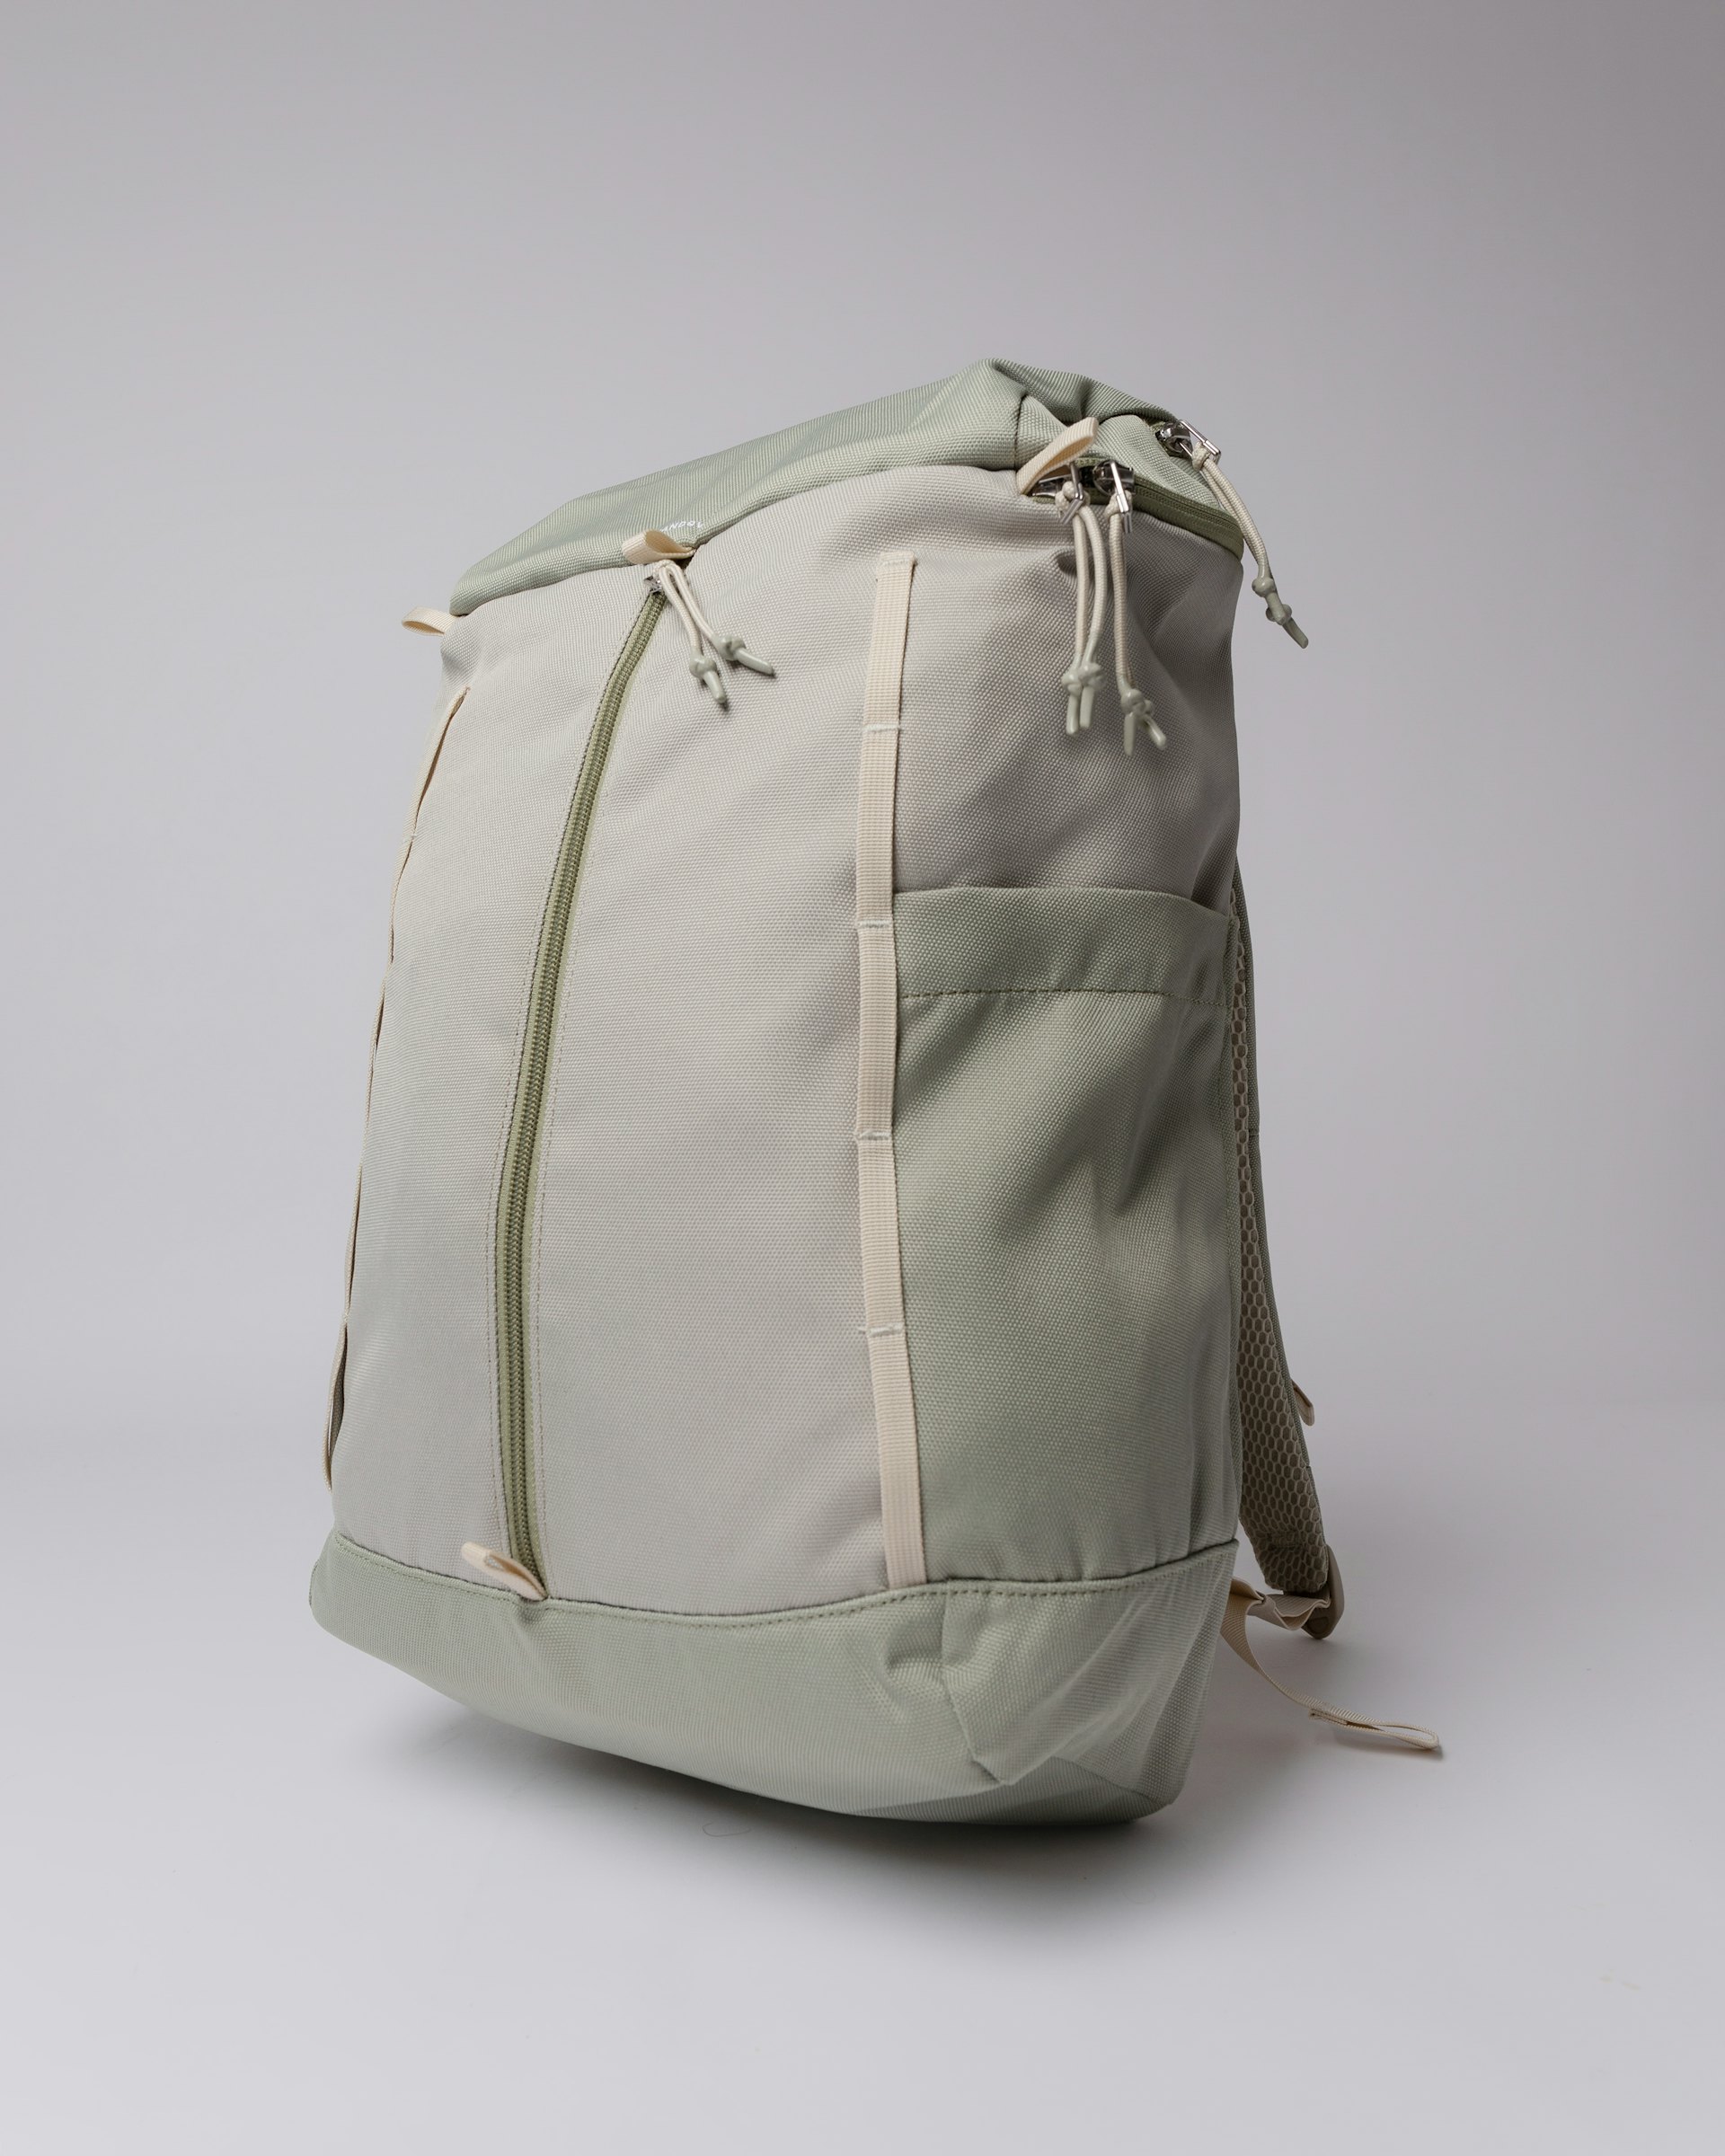 Sune belongs to the category Backpacks and is in color pale birch light & pale birch dark (4 of 7)